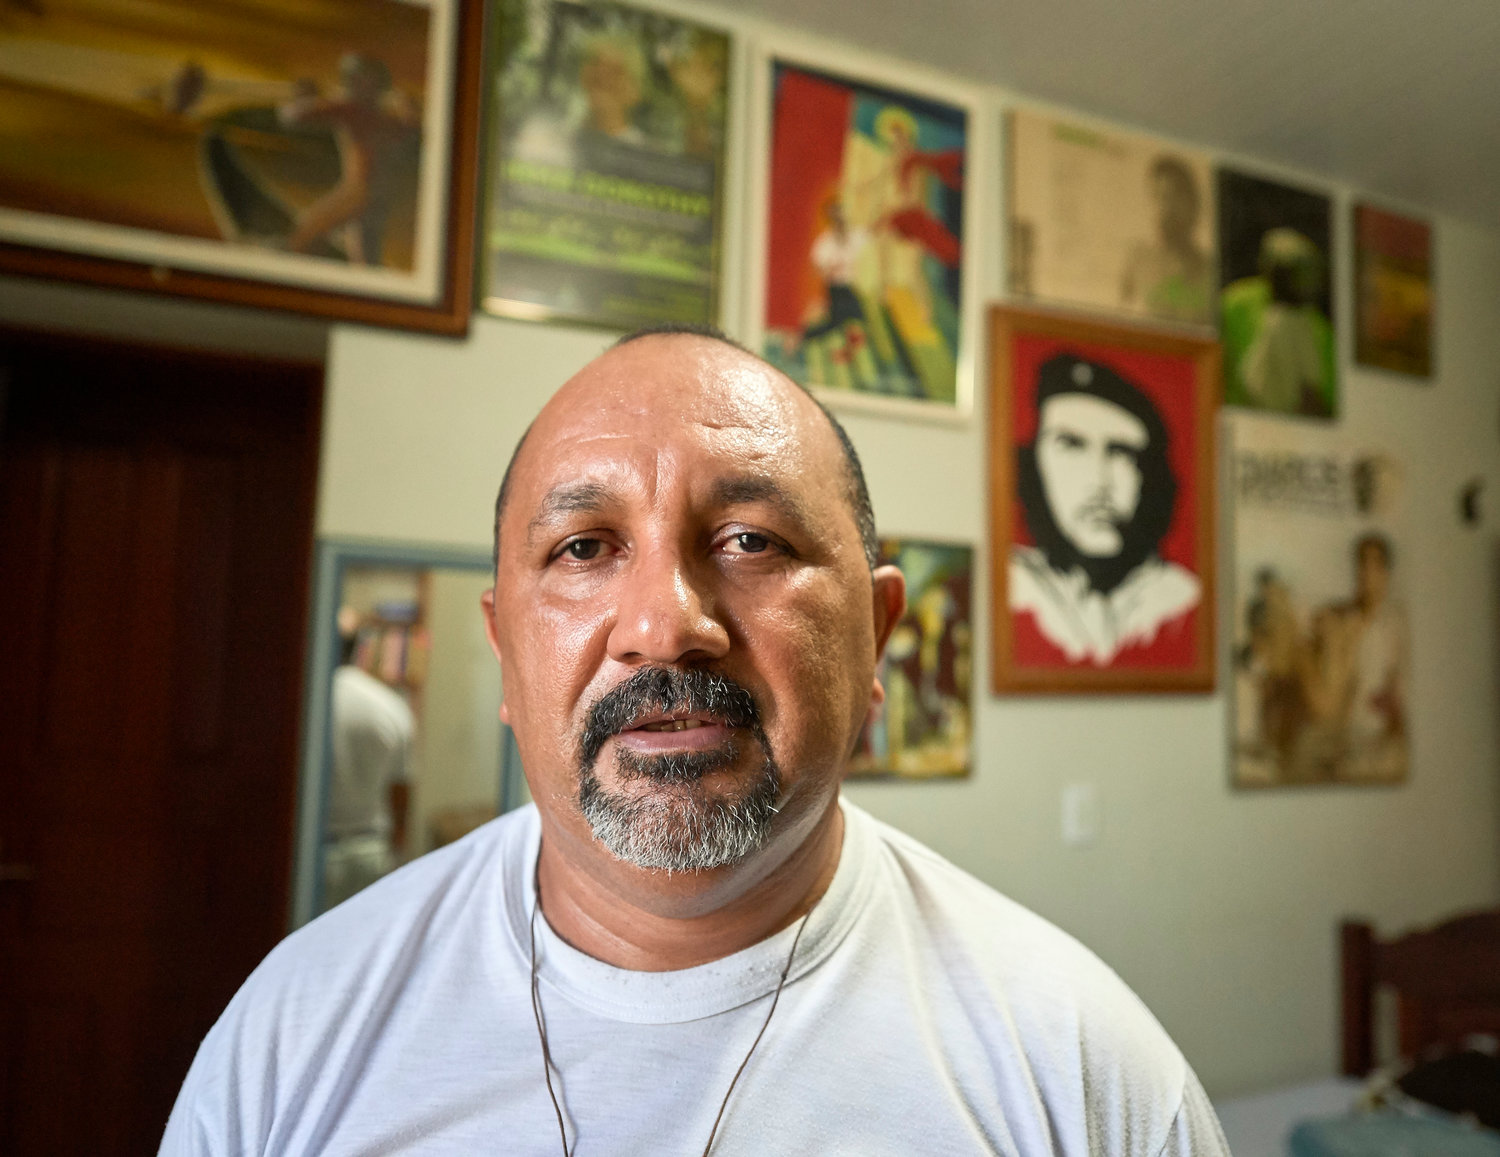 Father Jose Amaro Lopes de Souza speaks to an interviewer in Altamira, Brazil, in April 2019, when he was living under house arrest in the bishop's residence. Father de Souza continues to be threatened for his work defending landless peasants and small-scale farmers.